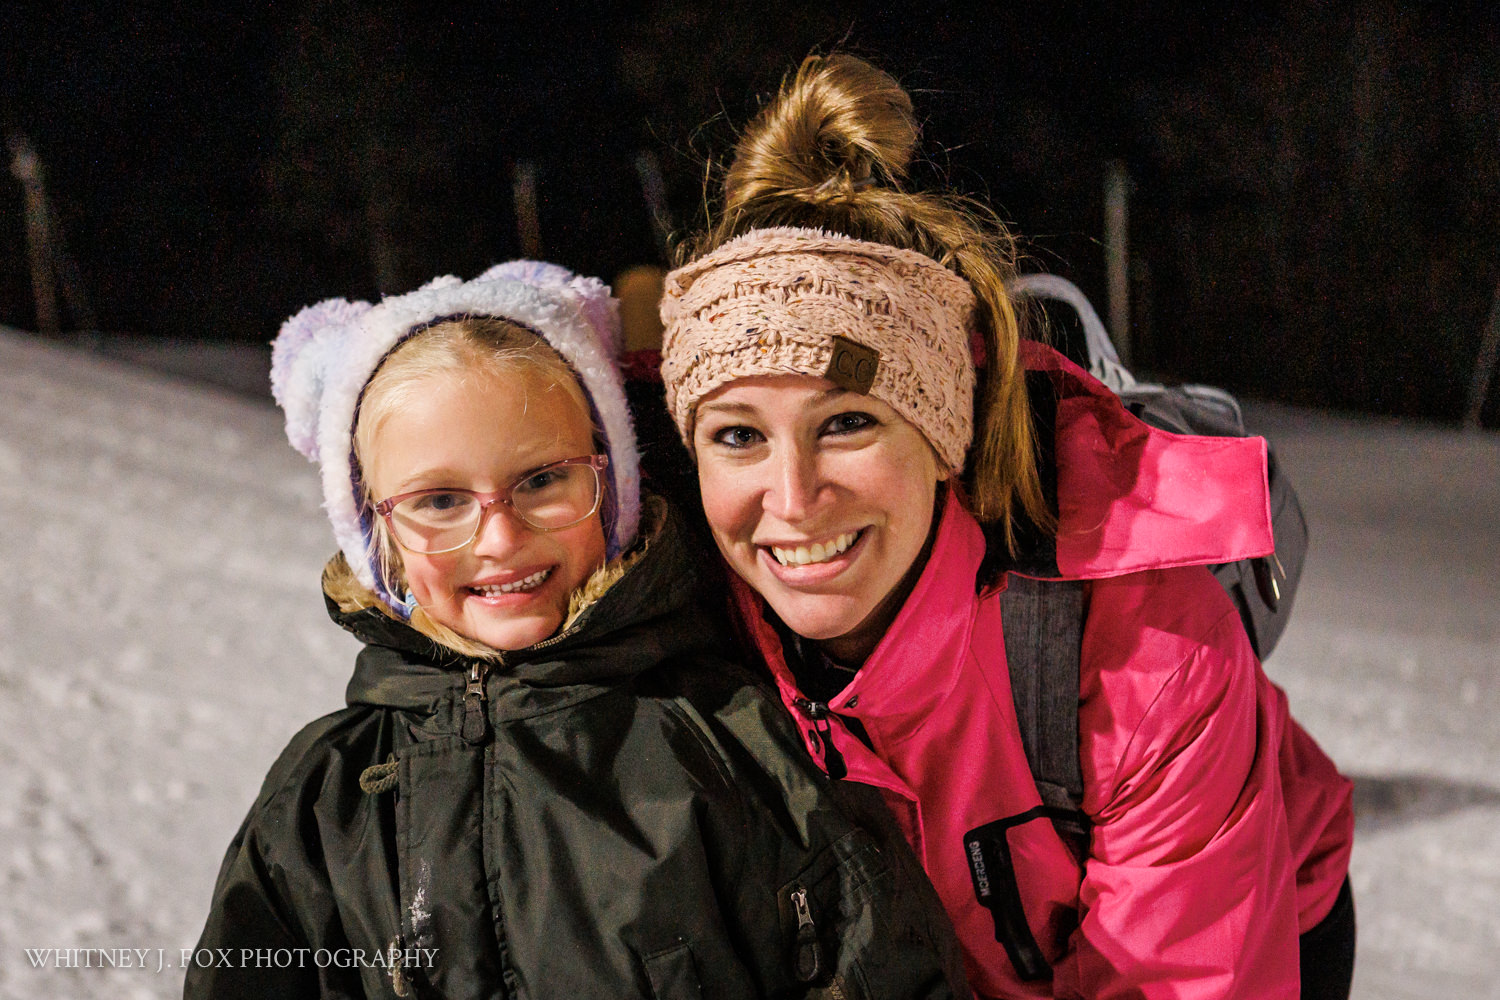 165 winter kids welcome to winter 2022 lost valley auburn maine documentary event photographer whitney j fox 3416 w